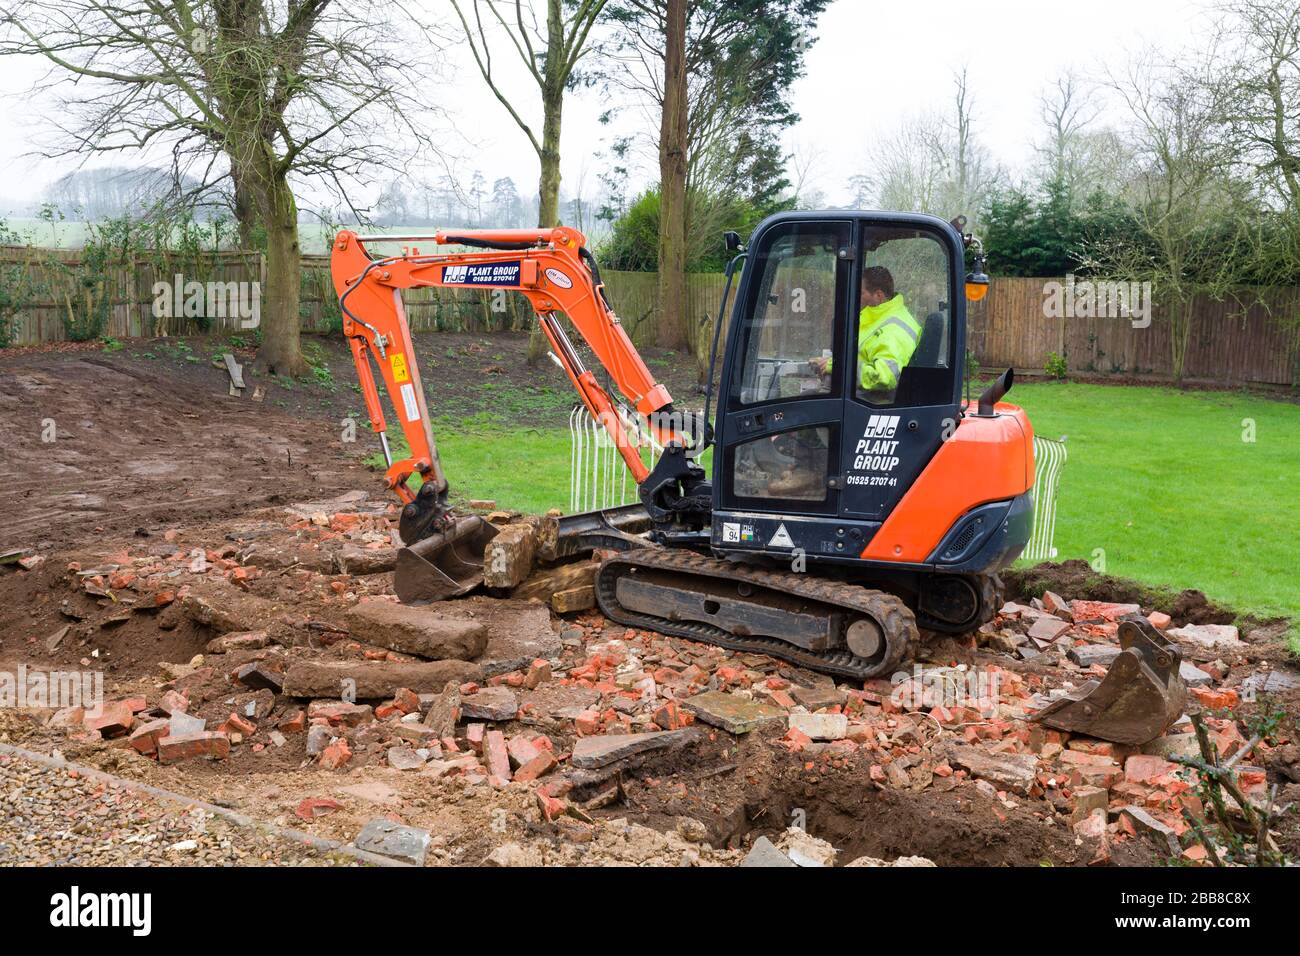 BUCKINGHAM, UK - February 13, 2016. Digger, bulldozer clearing rubble in preparation for hard landscaping a garden in UK Stock Photo